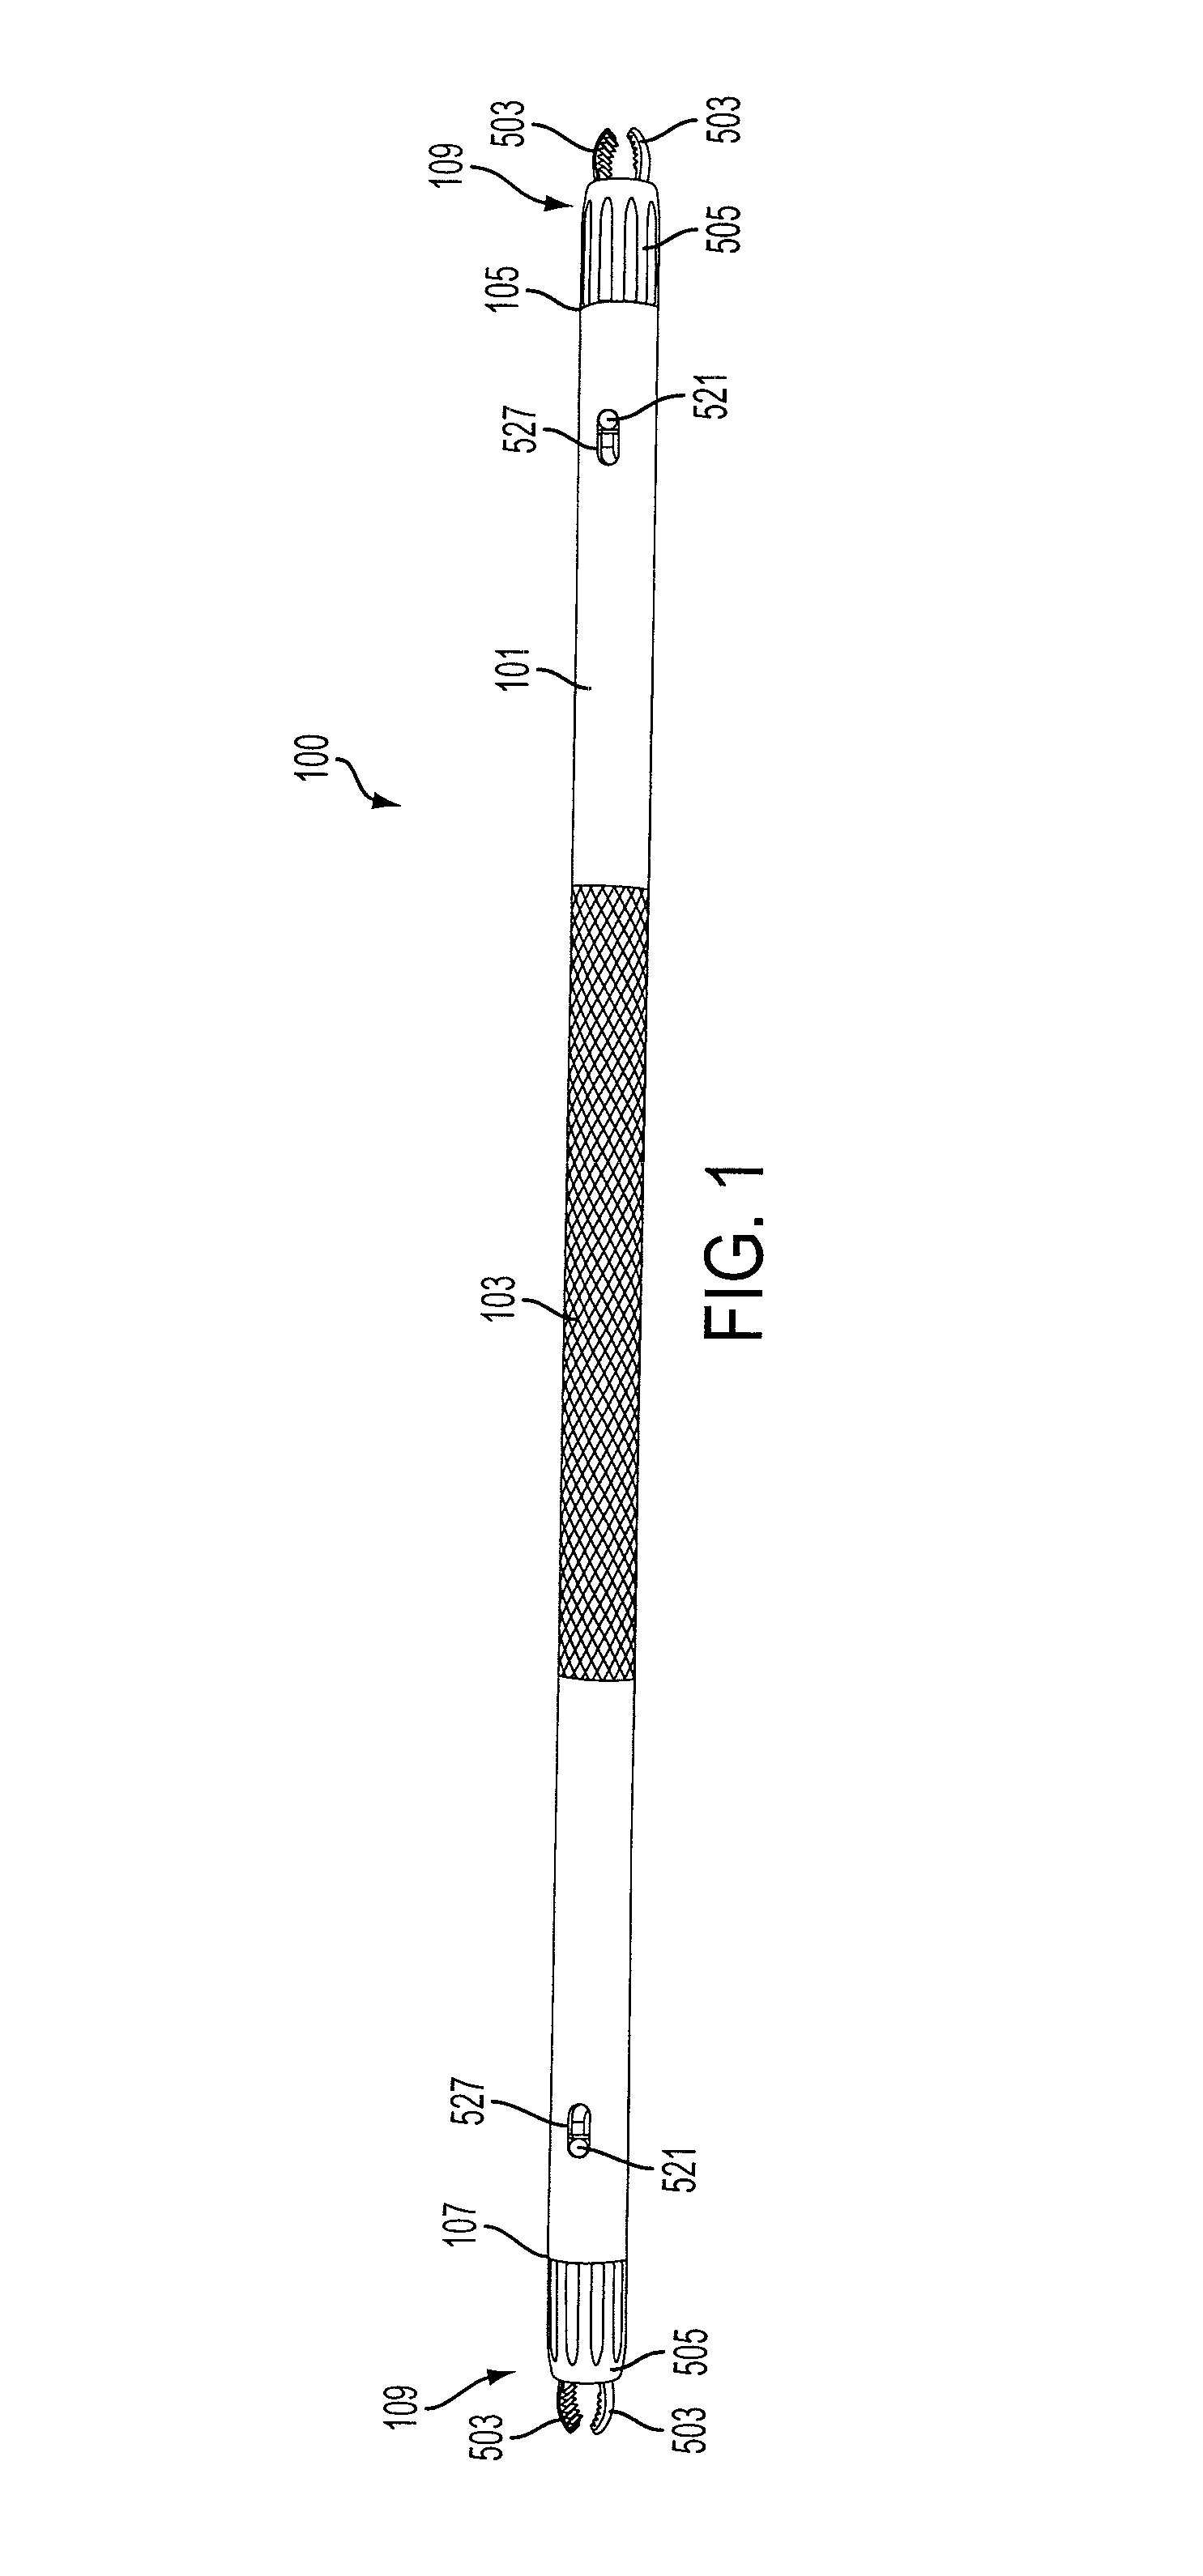 Blunt dissection and tissue elevation instrument